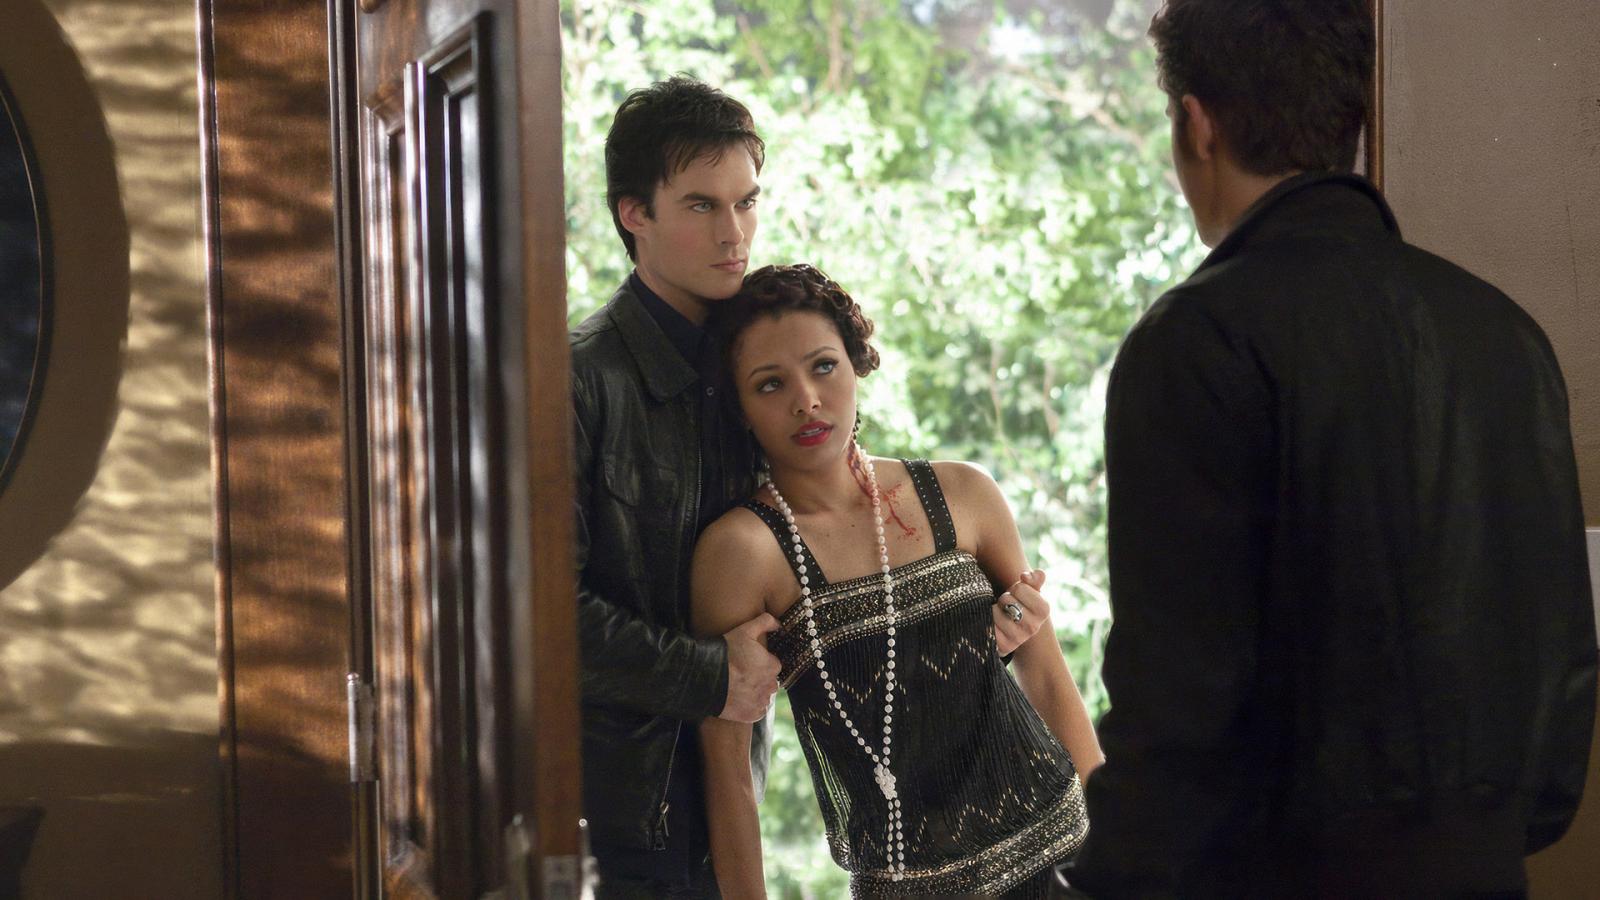 Forget Delena: These 5 Fan Ships Deserved to Be TVD Canon - image 4